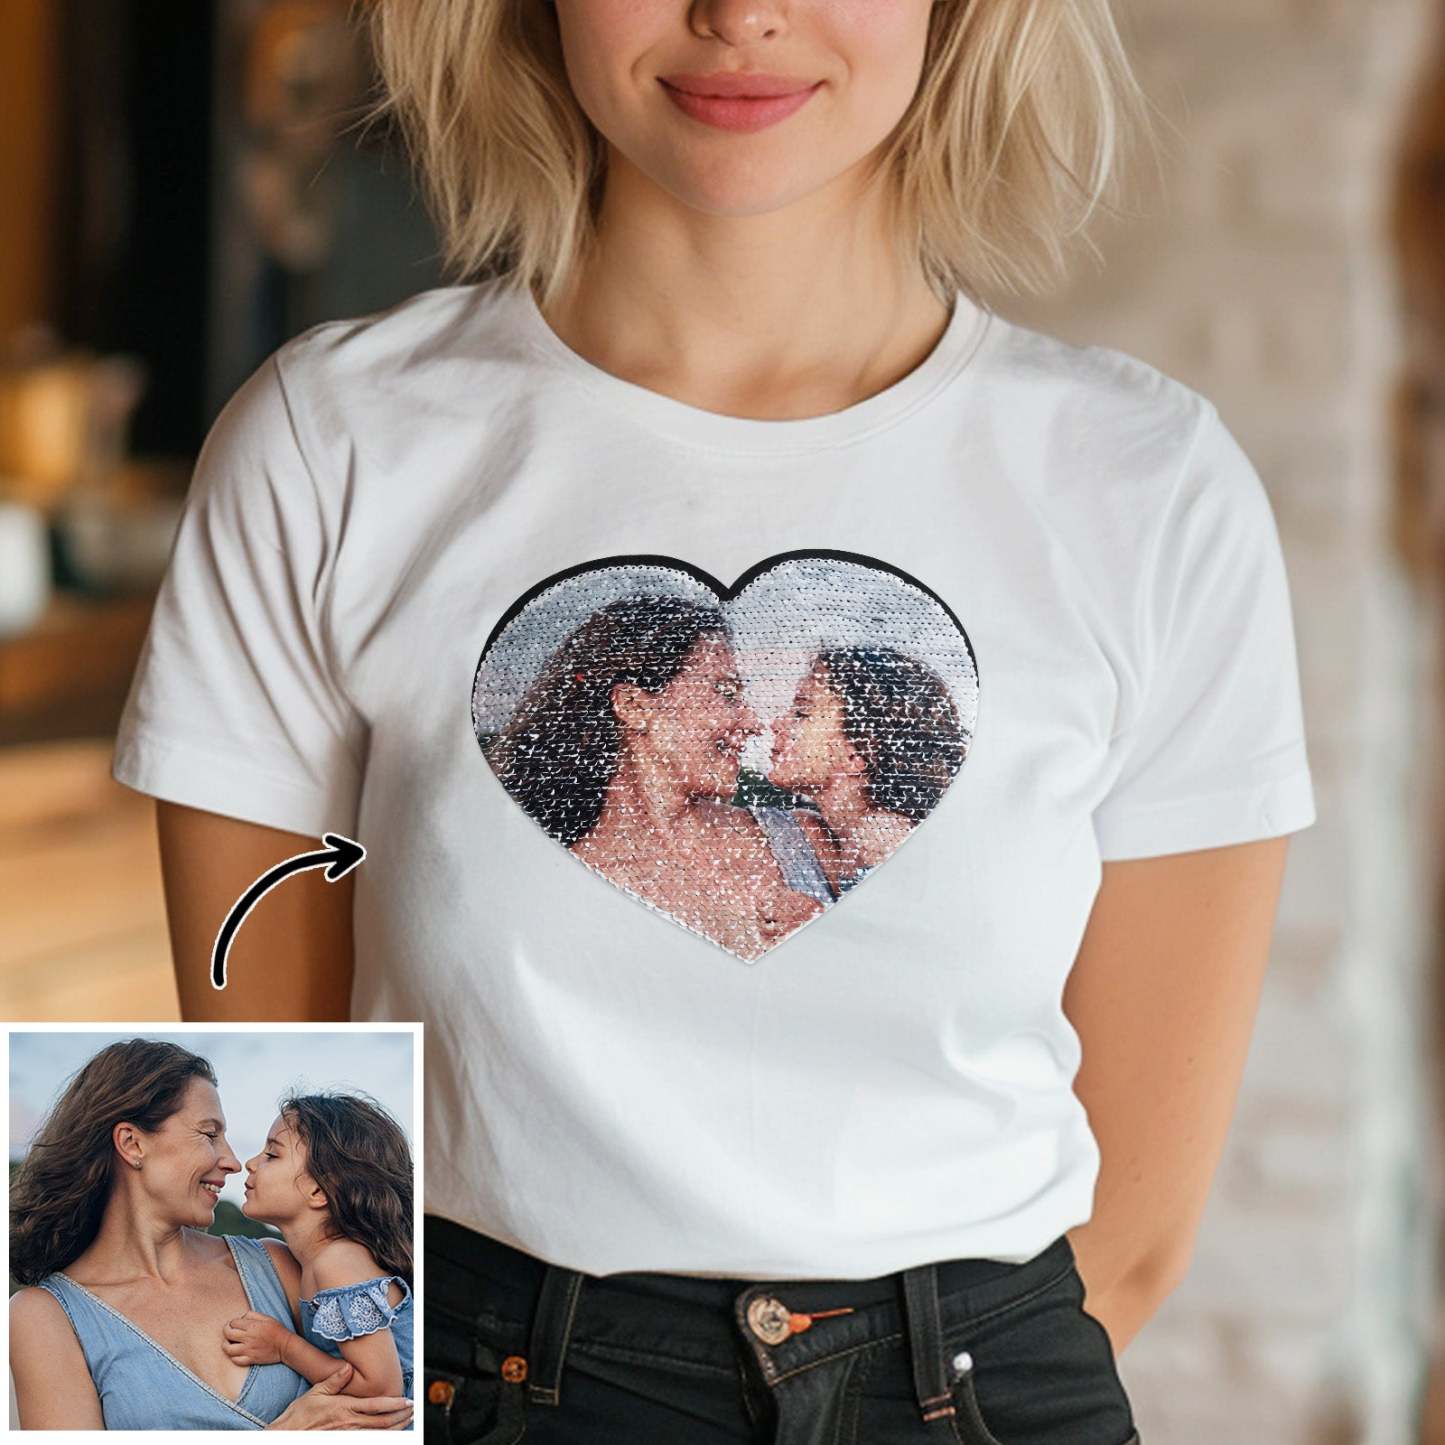 Custom Photo Heart Flip Double Sided Sequin T-shirt Personalised Picture Sequin Tee Mother's Day Gifts - soufeeluk